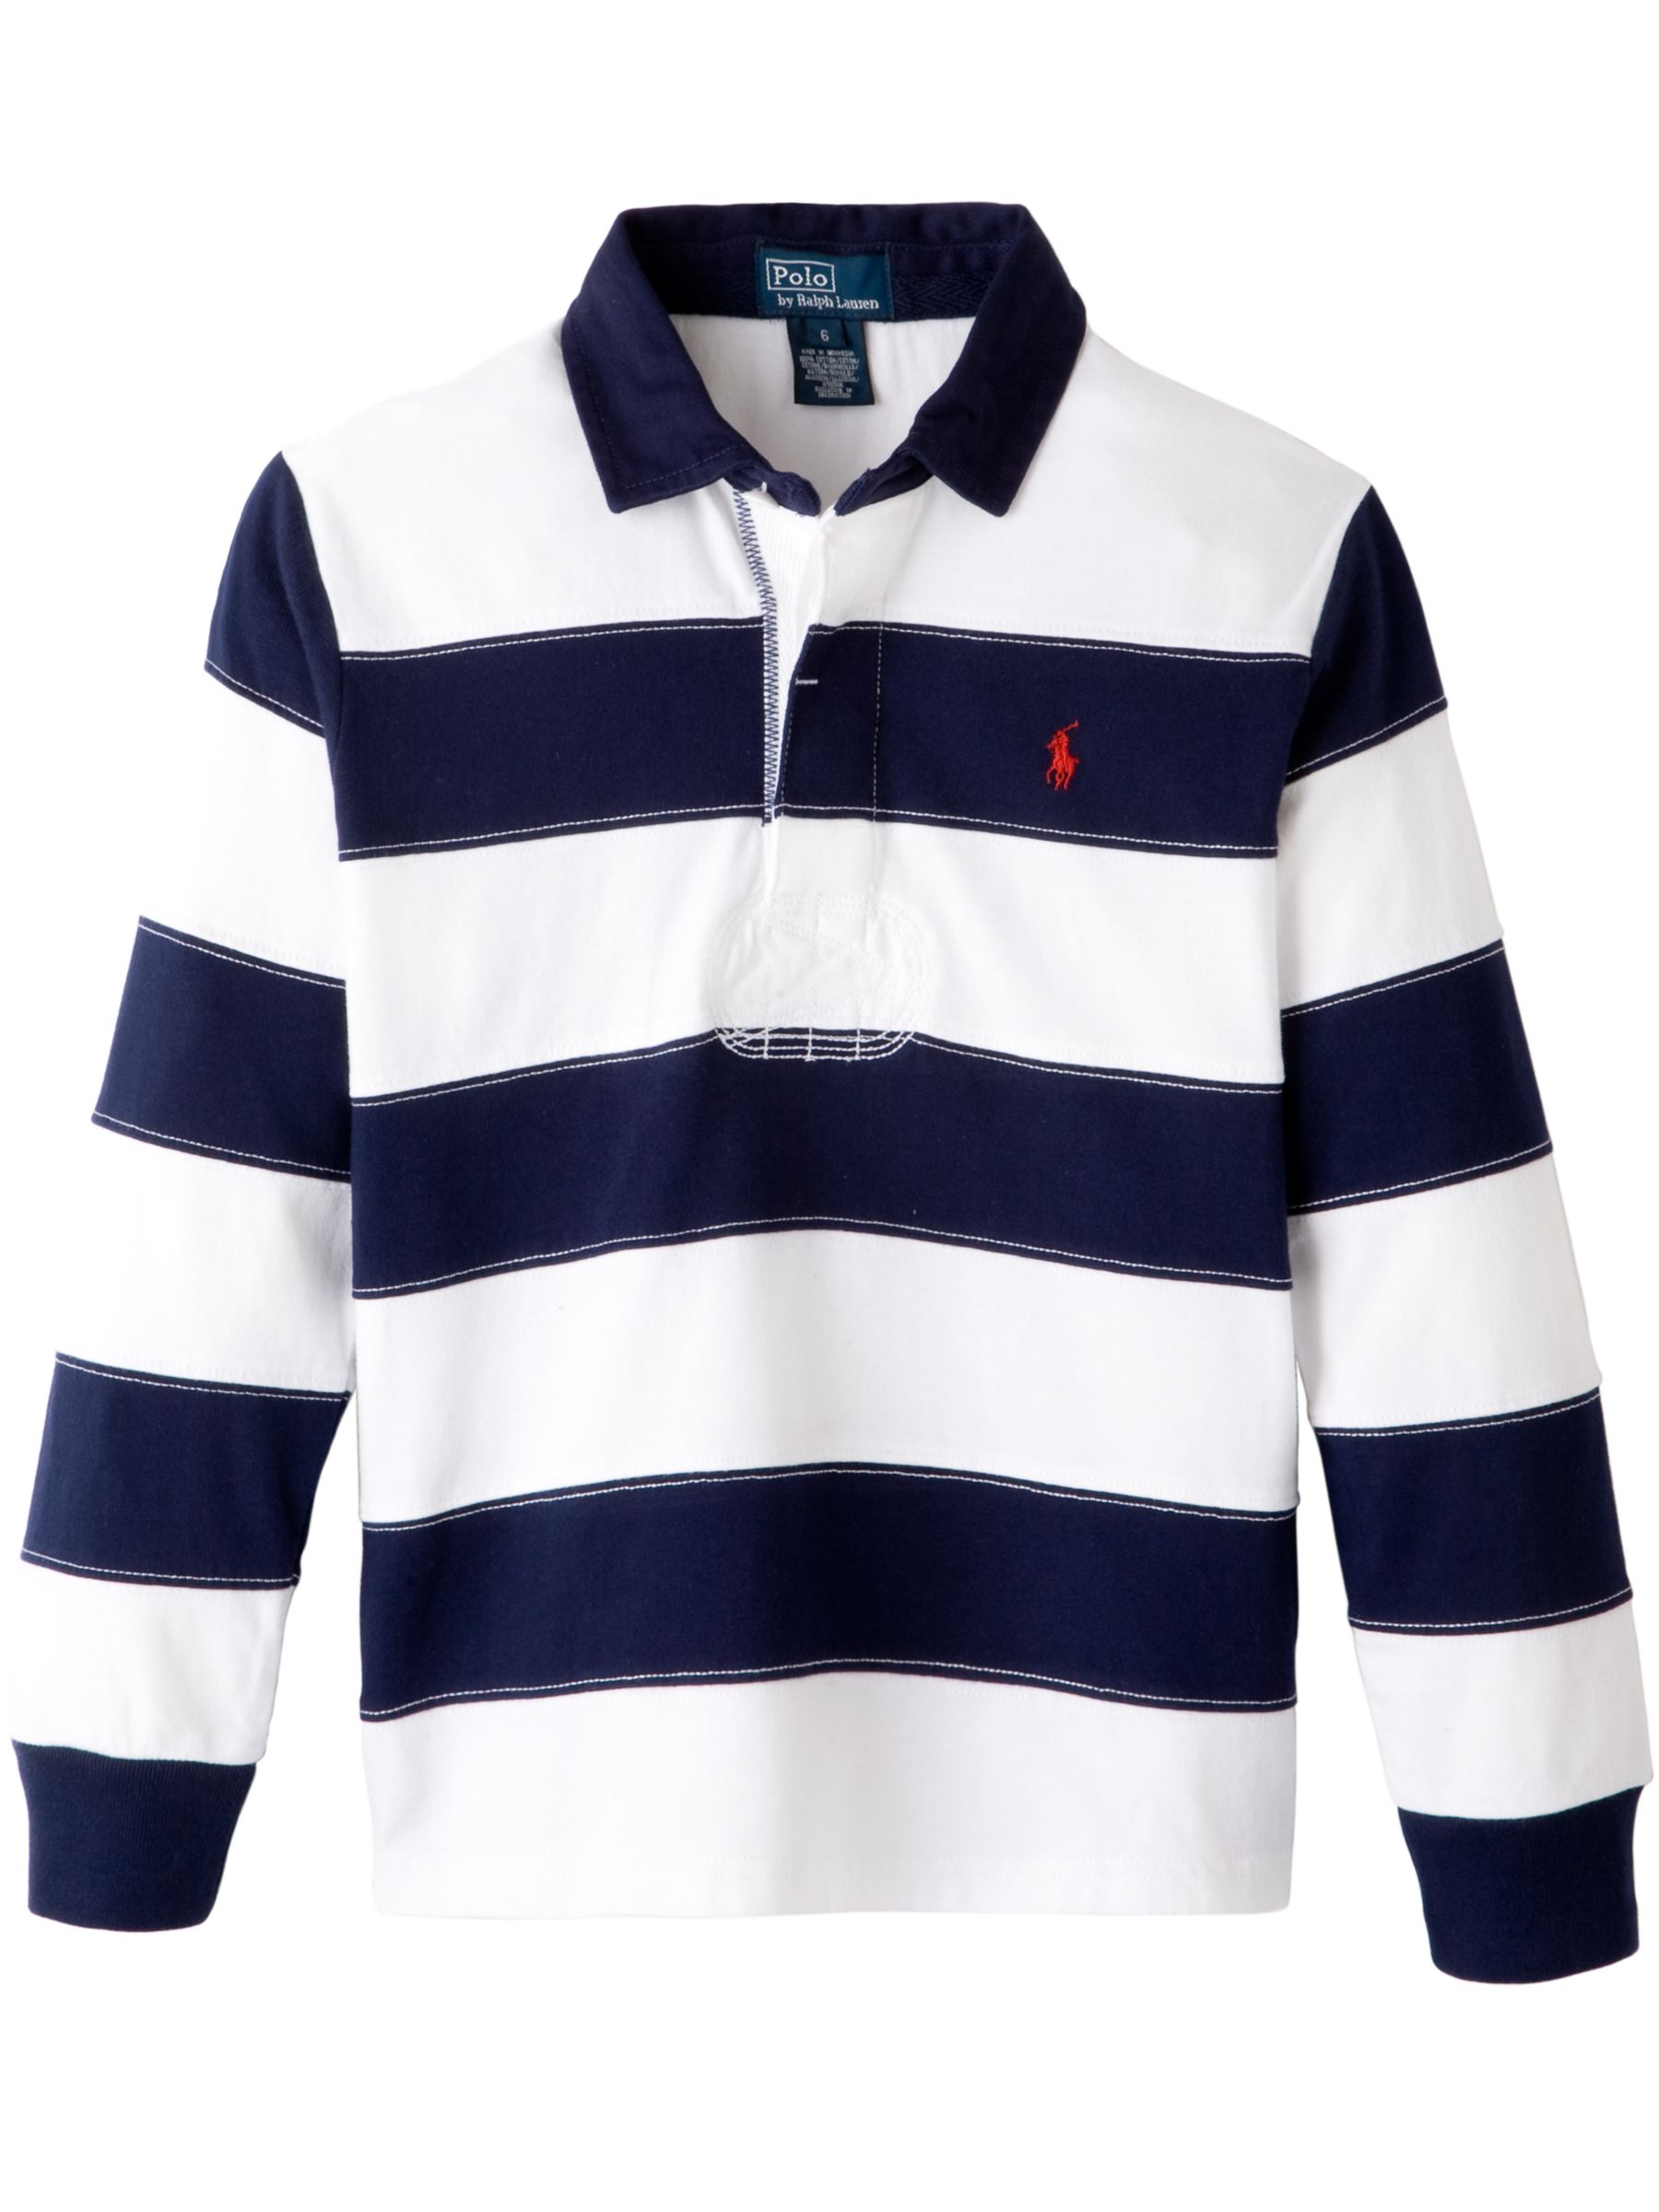 Rugby Shirt, Blue / White,